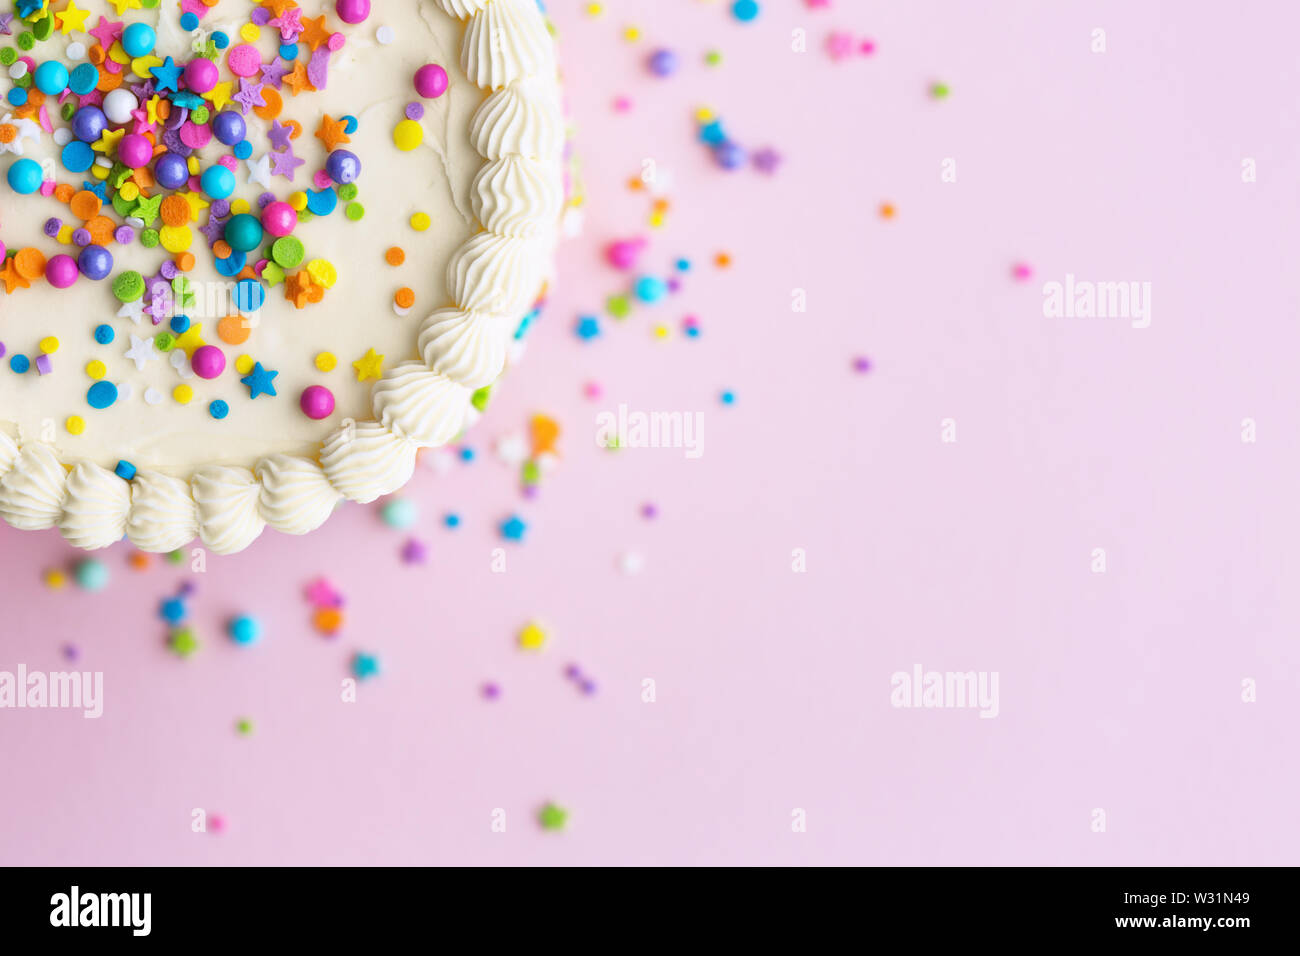 Birthday cake with sprinkles on a pink background Stock Photo